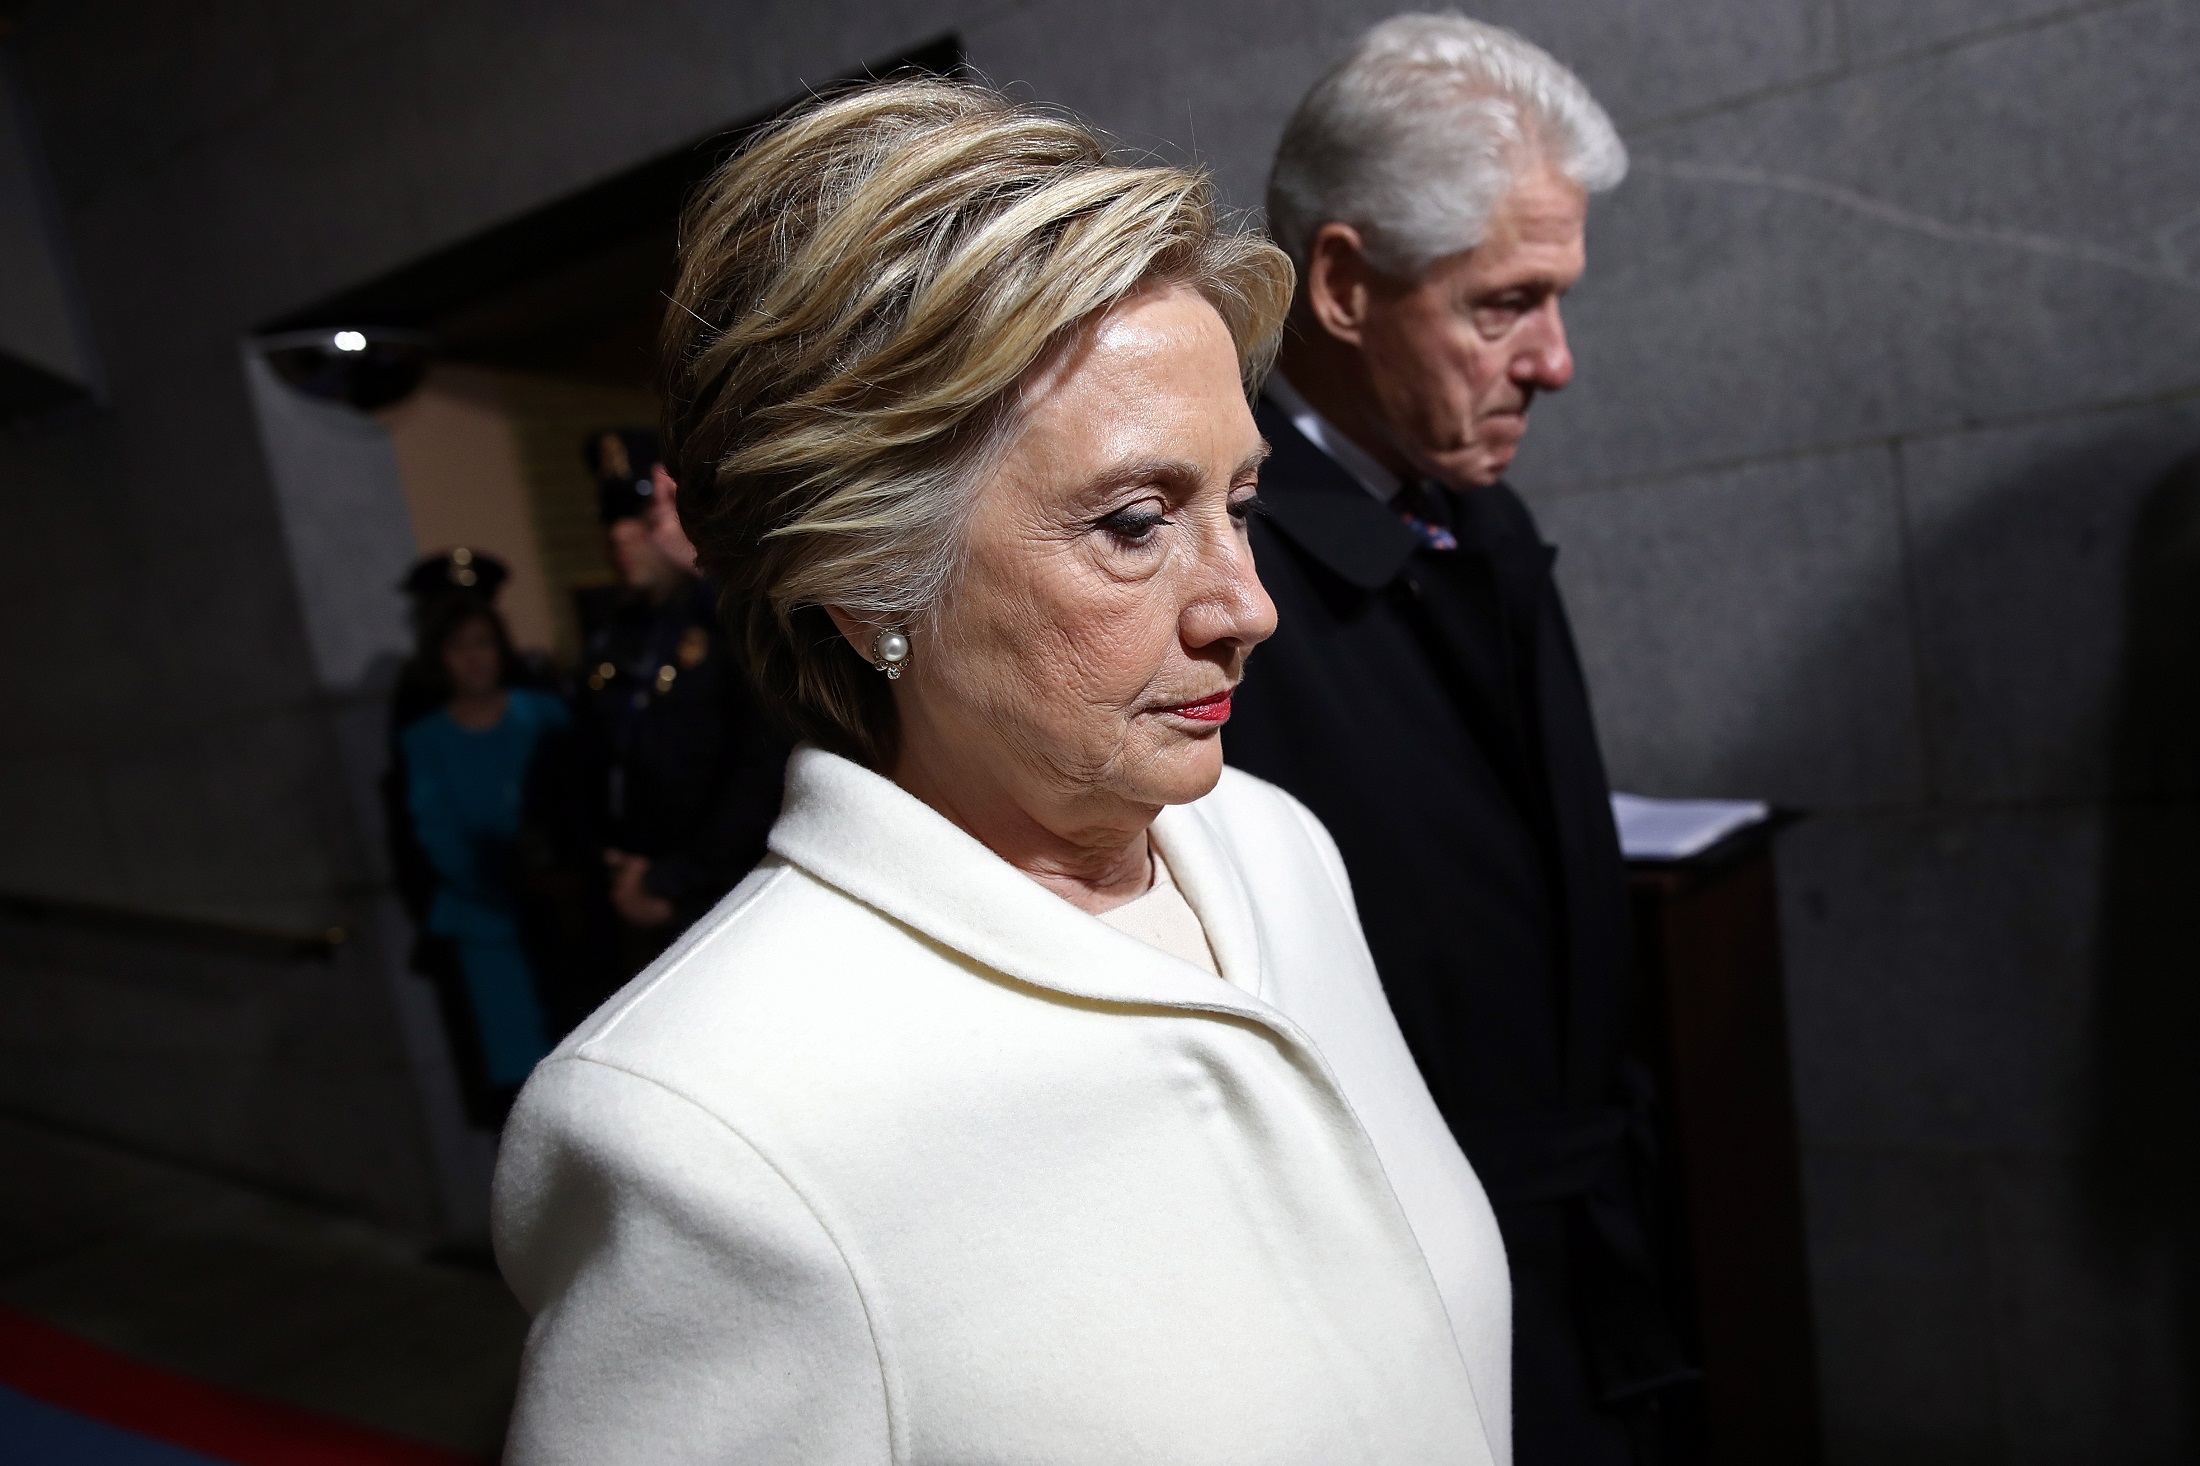 WASHINGTON, DC - JANUARY 20: Former Democratic presidential nominee Hillary Clinton (L) and former President Bill Clinton arrive on the West Front of the U.S. Capitol on January 20, 2017 in Washington, DC. In today's inauguration ceremony Donald J. Trump becomes the 45th president of the United States.   Win McNamee/Getty Images/AFP